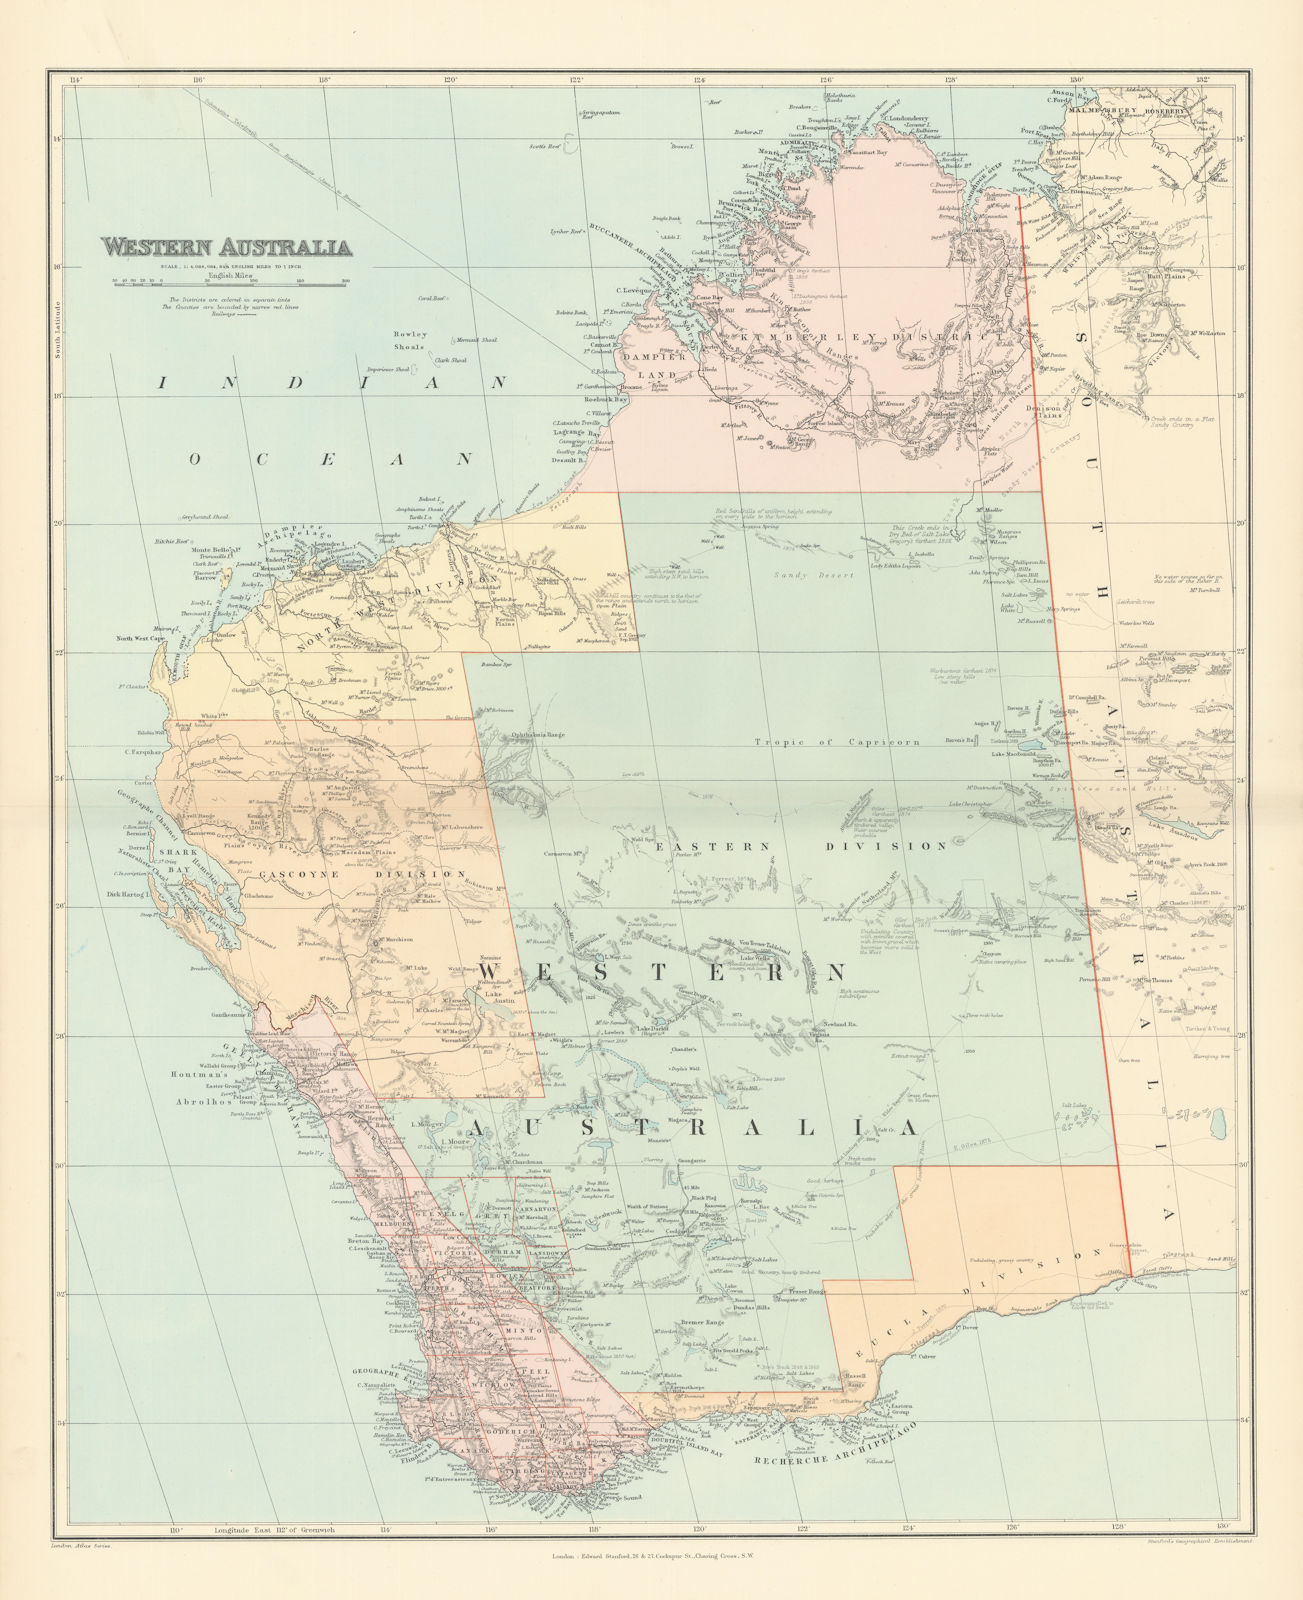 Western Australia. Districts. Explorers' routes. Large 66x55cm STANFORD 1896 map